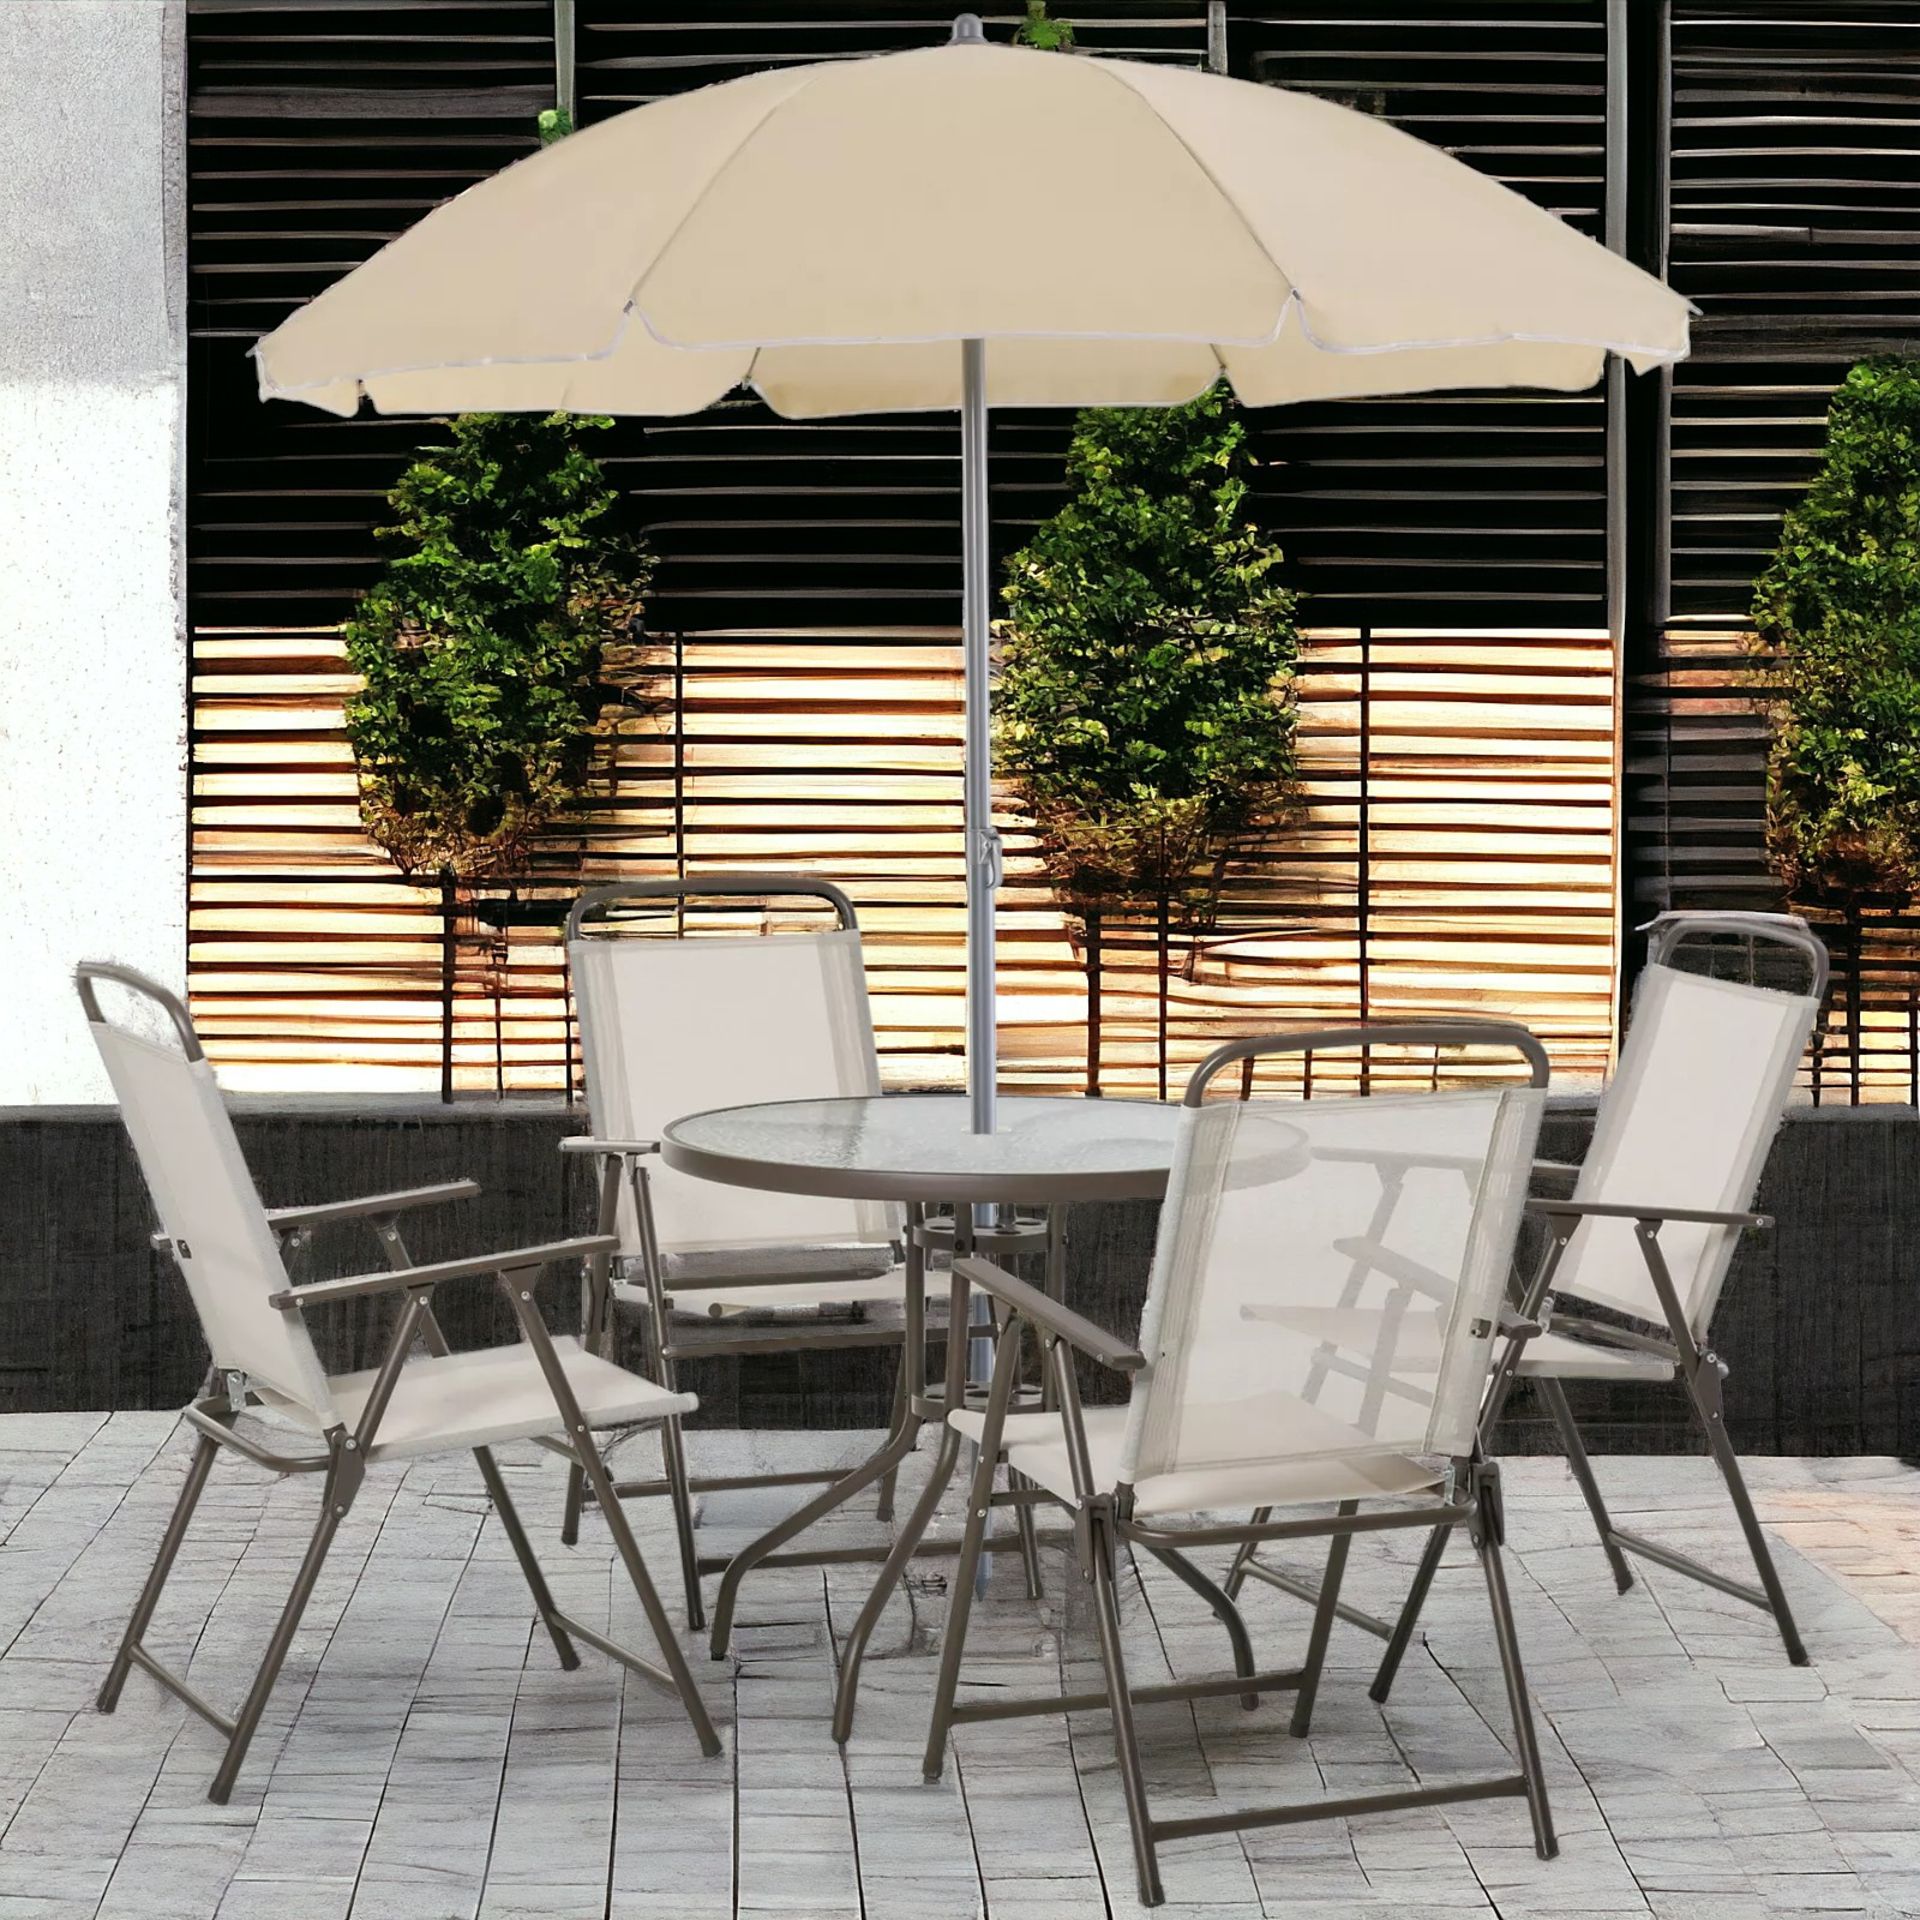 FREE DELIVERY - BRAND NEW 6PC GARDEN DINING SET OUTDOOR FURNITURE FOLDING CHAIRS TABLE PARASOL